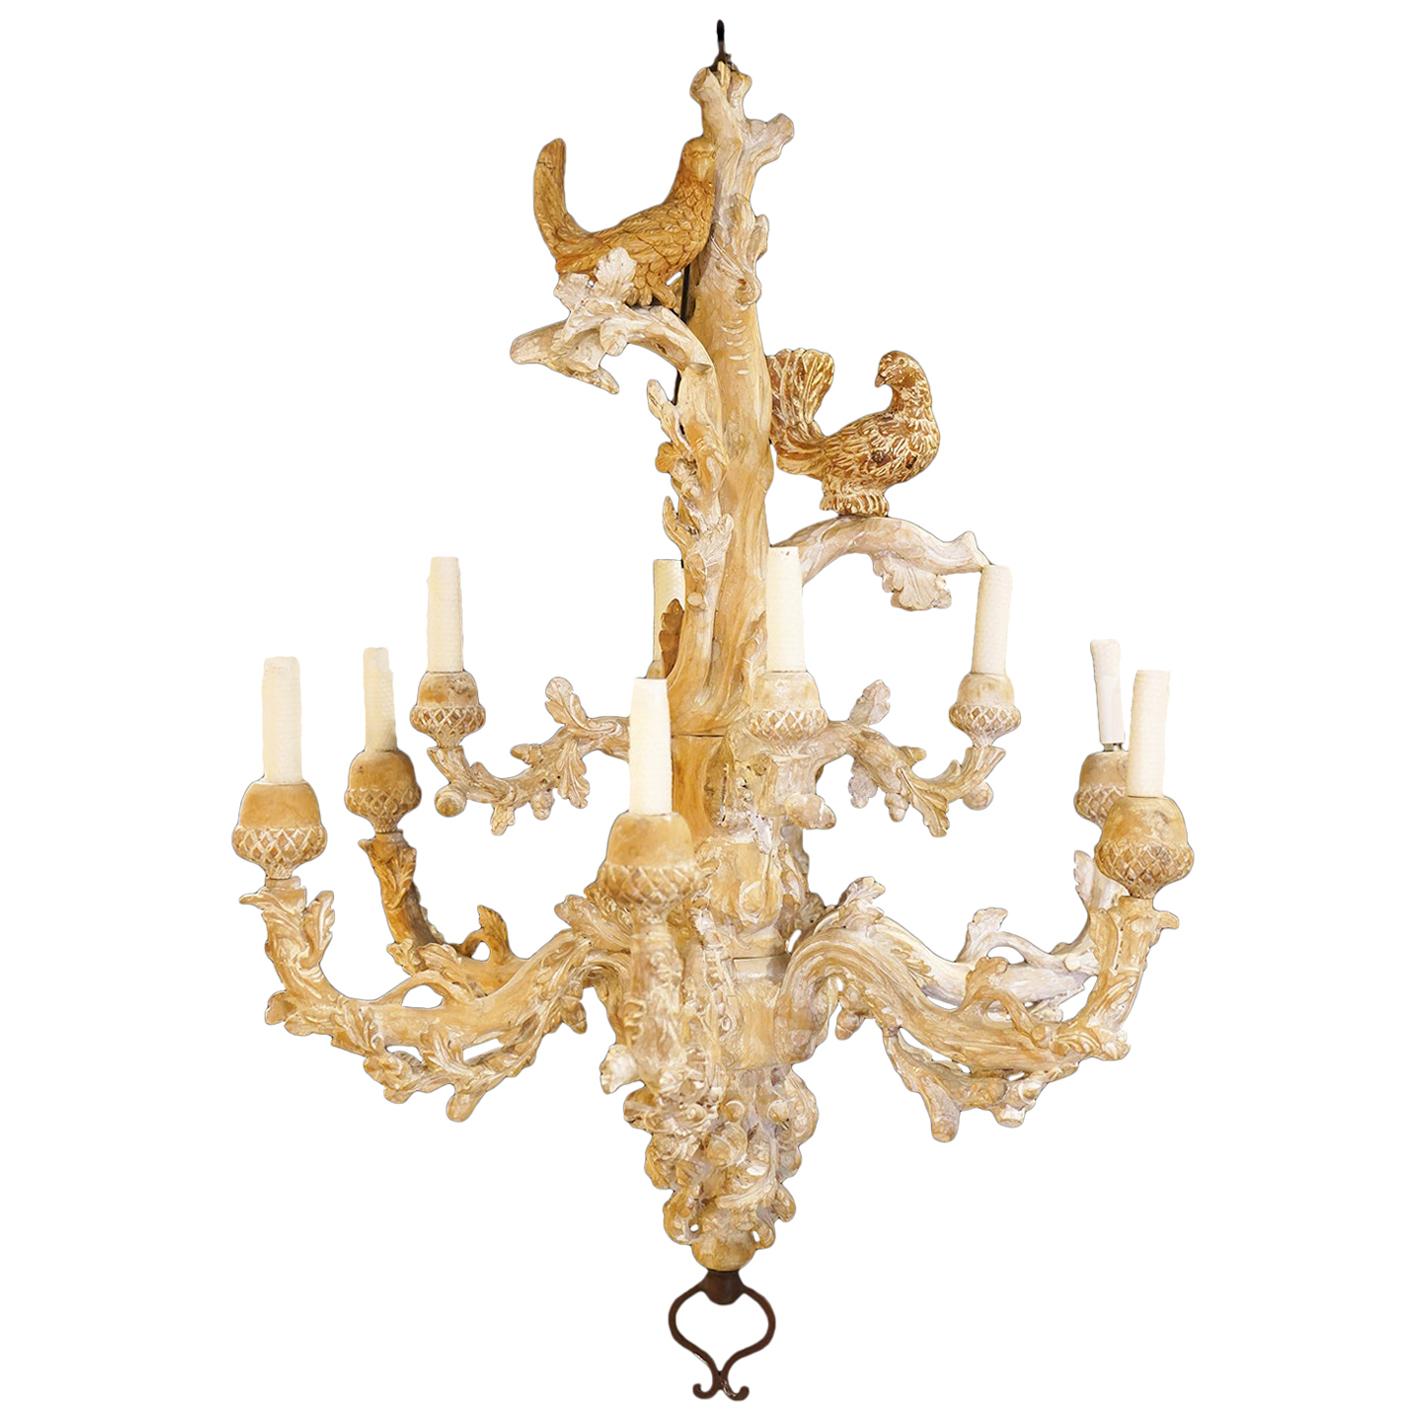 !0 Arms Sculptural Carved Italian Chandelier, Two Doves Perched on Top